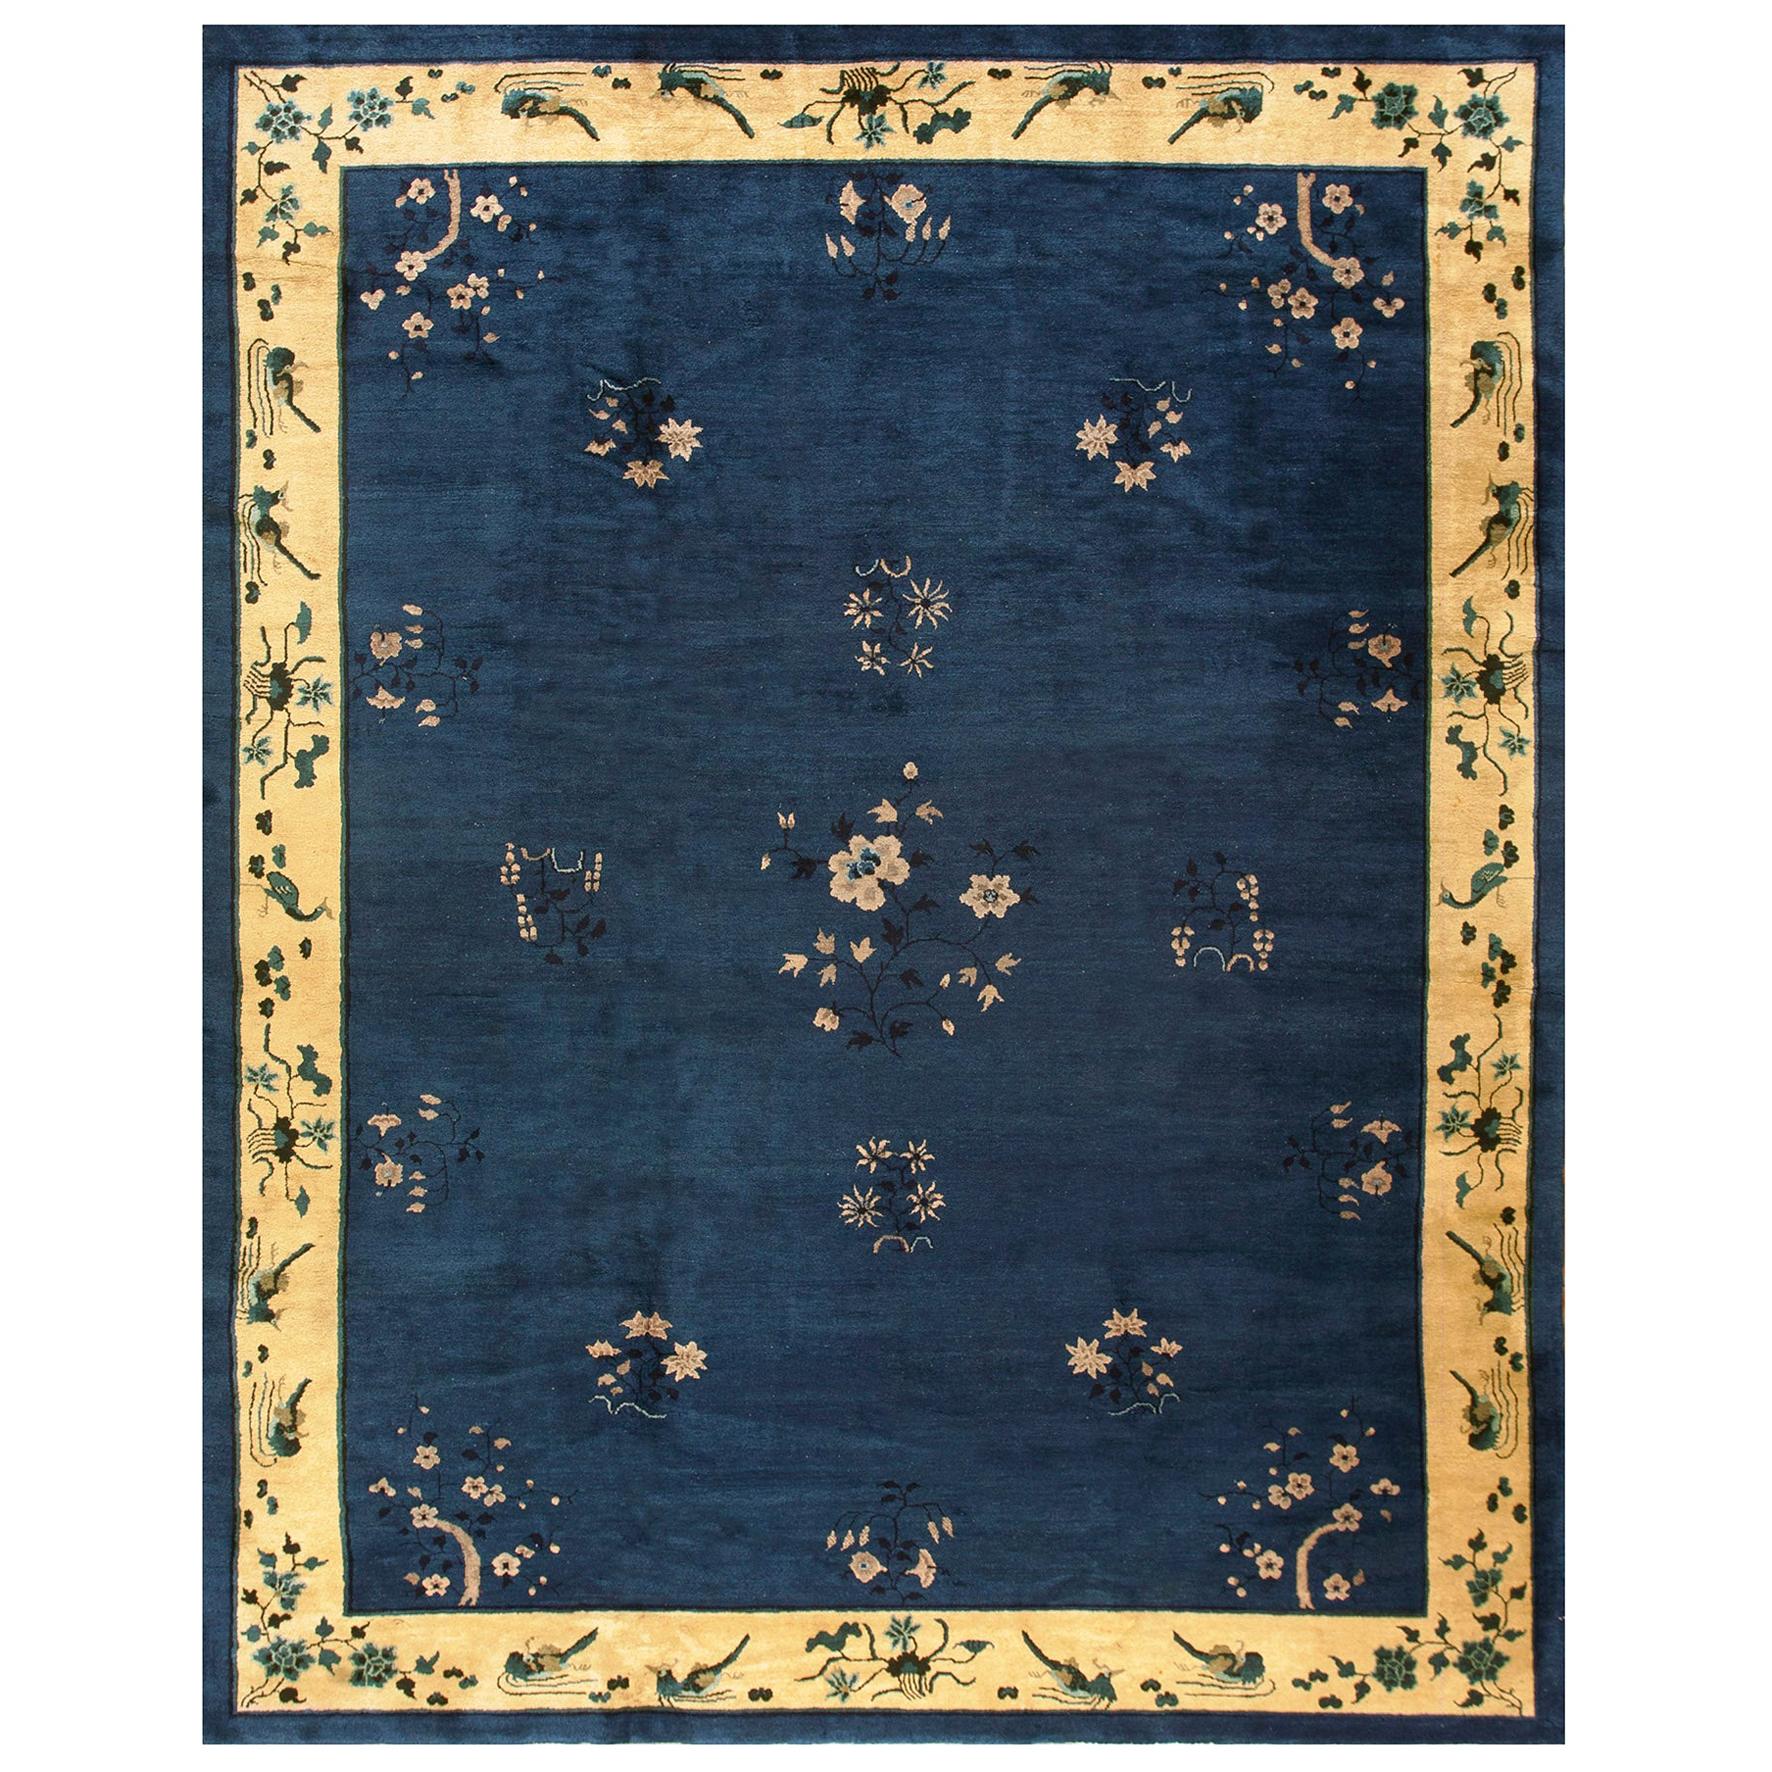 Early 20th Century Chinese Peking Carpet ( 9' x 11'4" - 275 x 345 ) For Sale